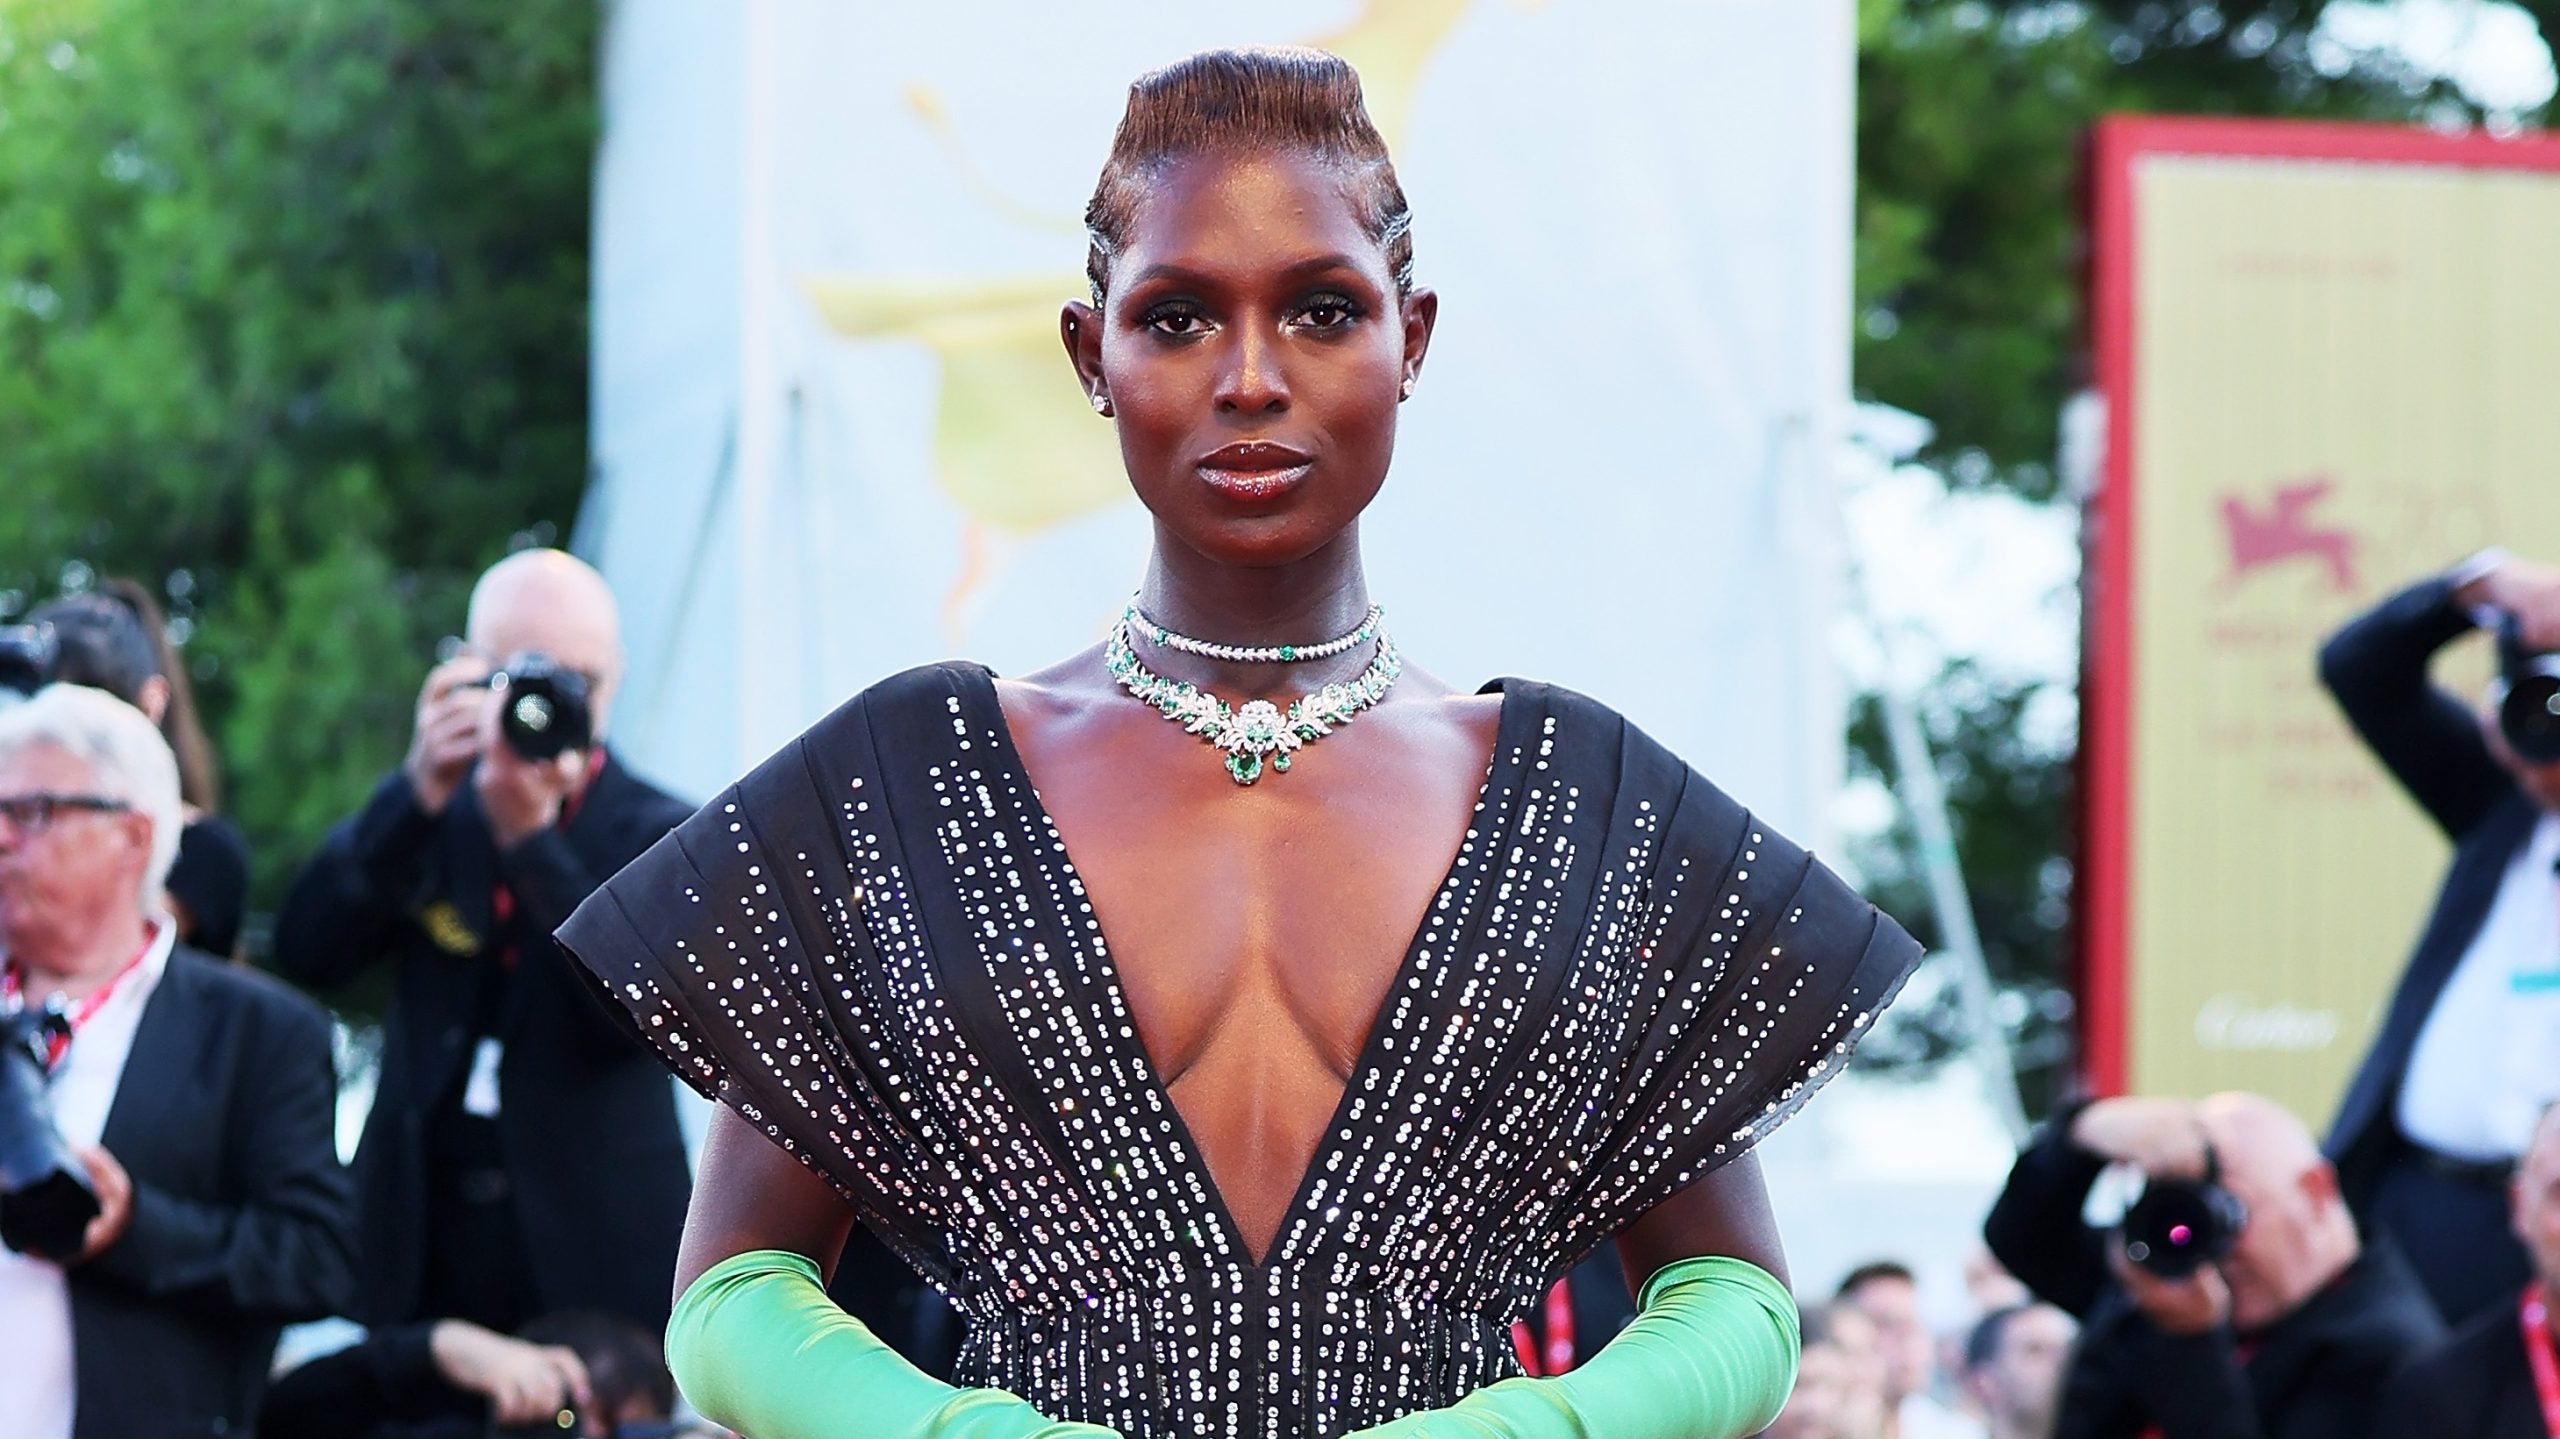 Here Are The Venice Film Festival Looks That We’re Loving